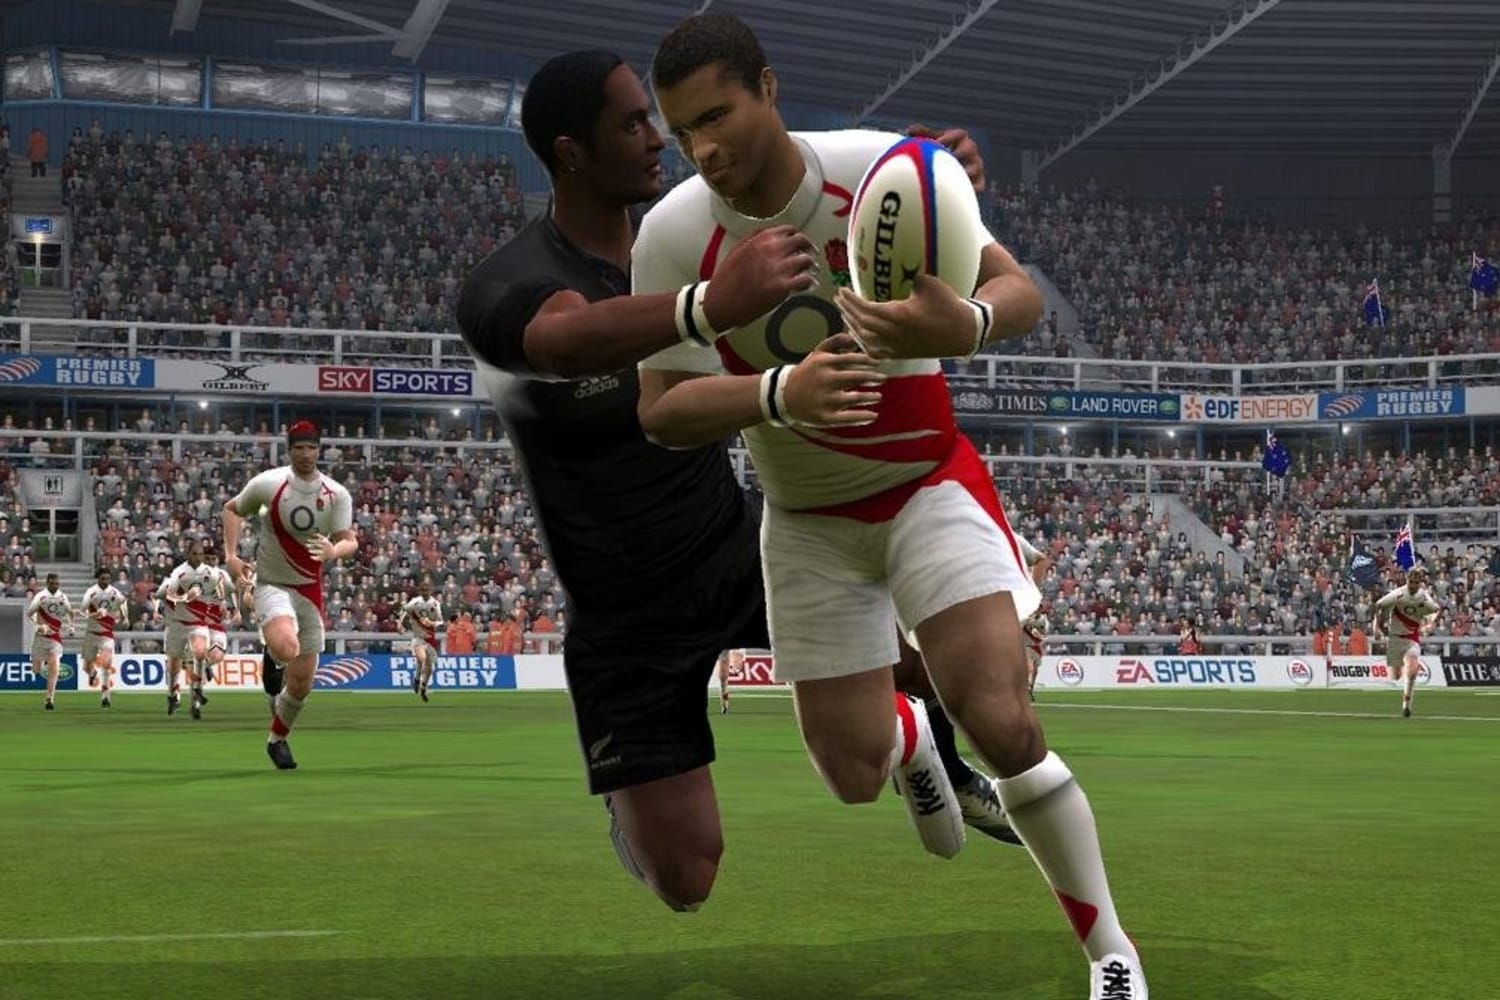 Best rugby video games of all time: The top 5